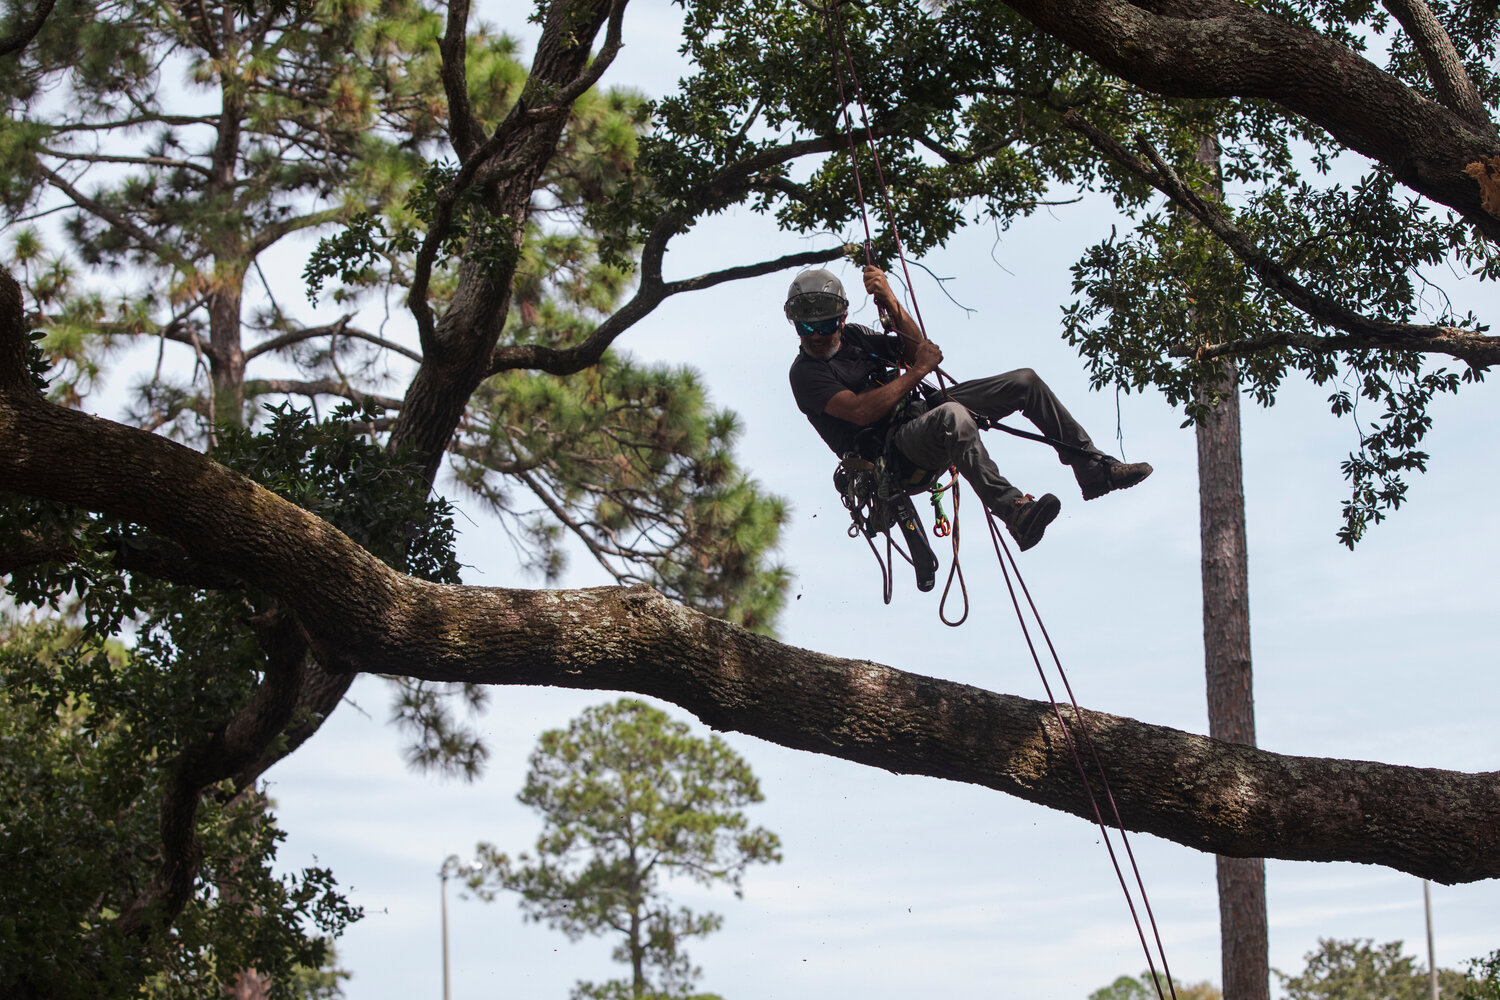 The competition, which may return to the island next year but has rotated to different parts of the state in the past, is always open to the public. Above,
Tony Brown repels from a branch. Below, Justin Cantrell sits for a break and a portrait.